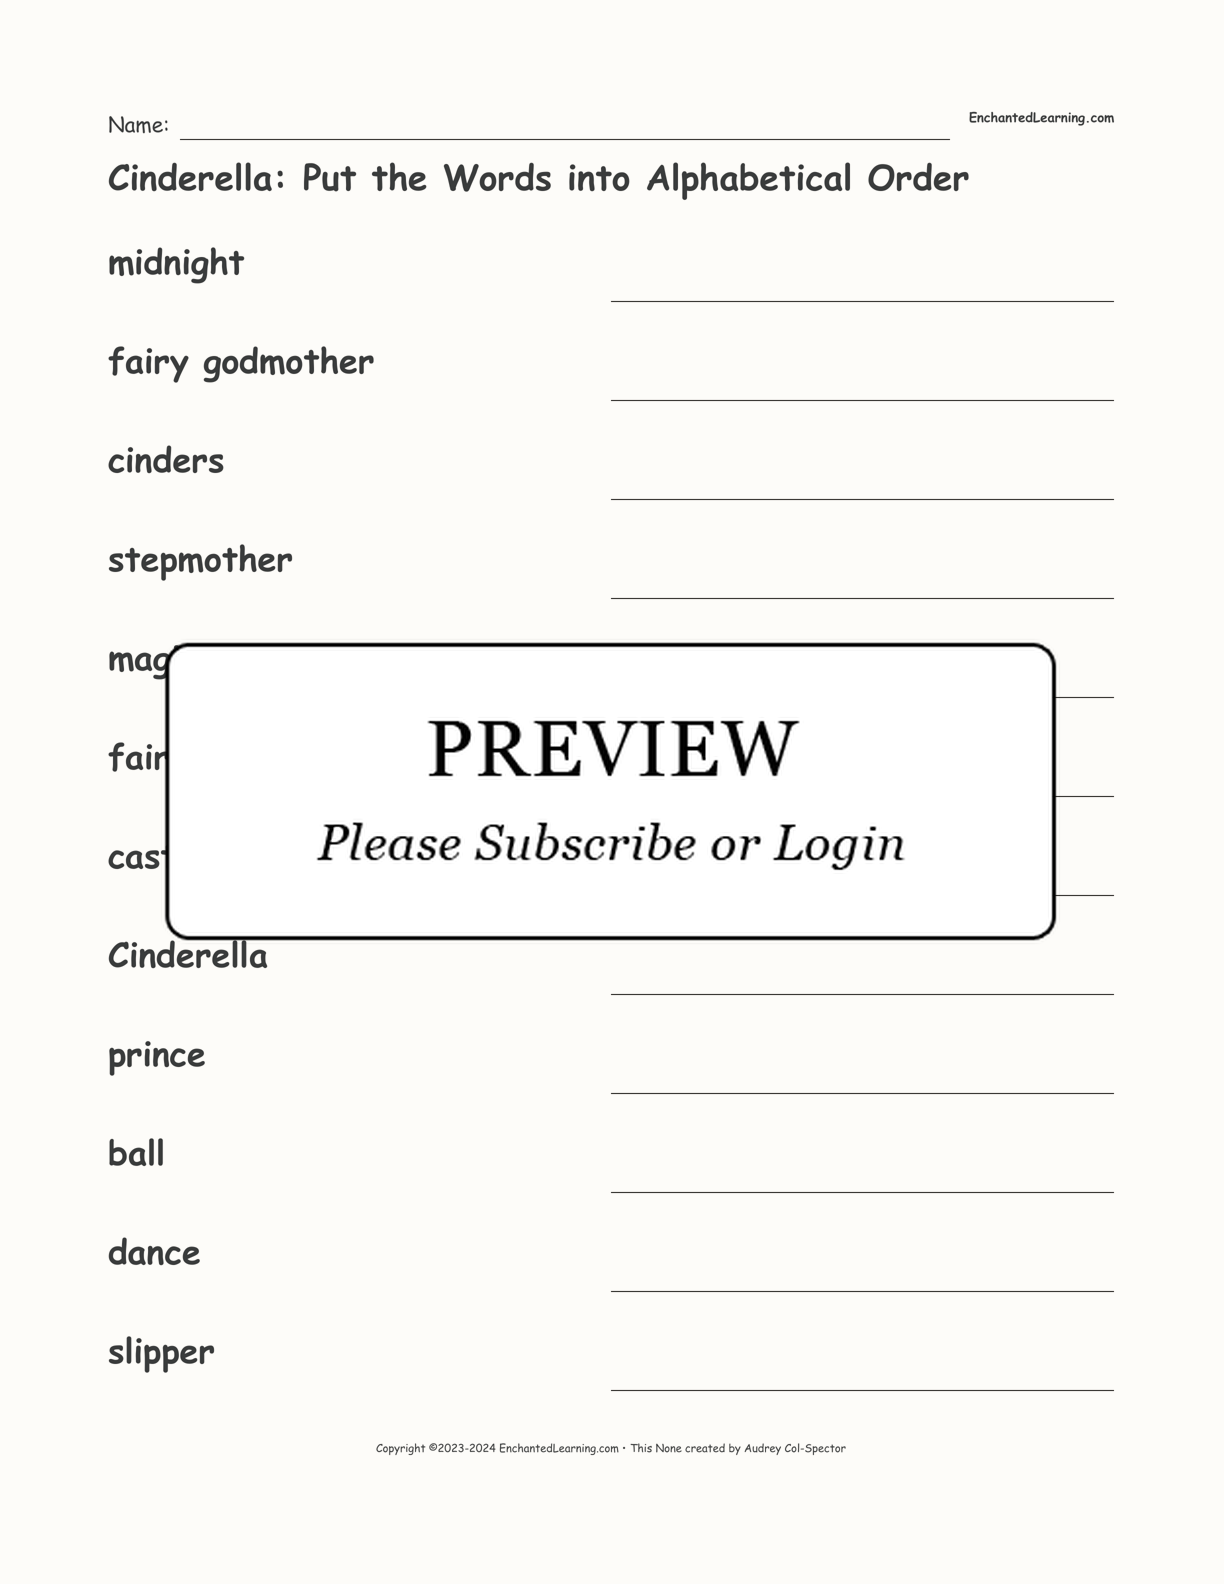 Cinderella: Put the Words into Alphabetical Order interactive worksheet page 1